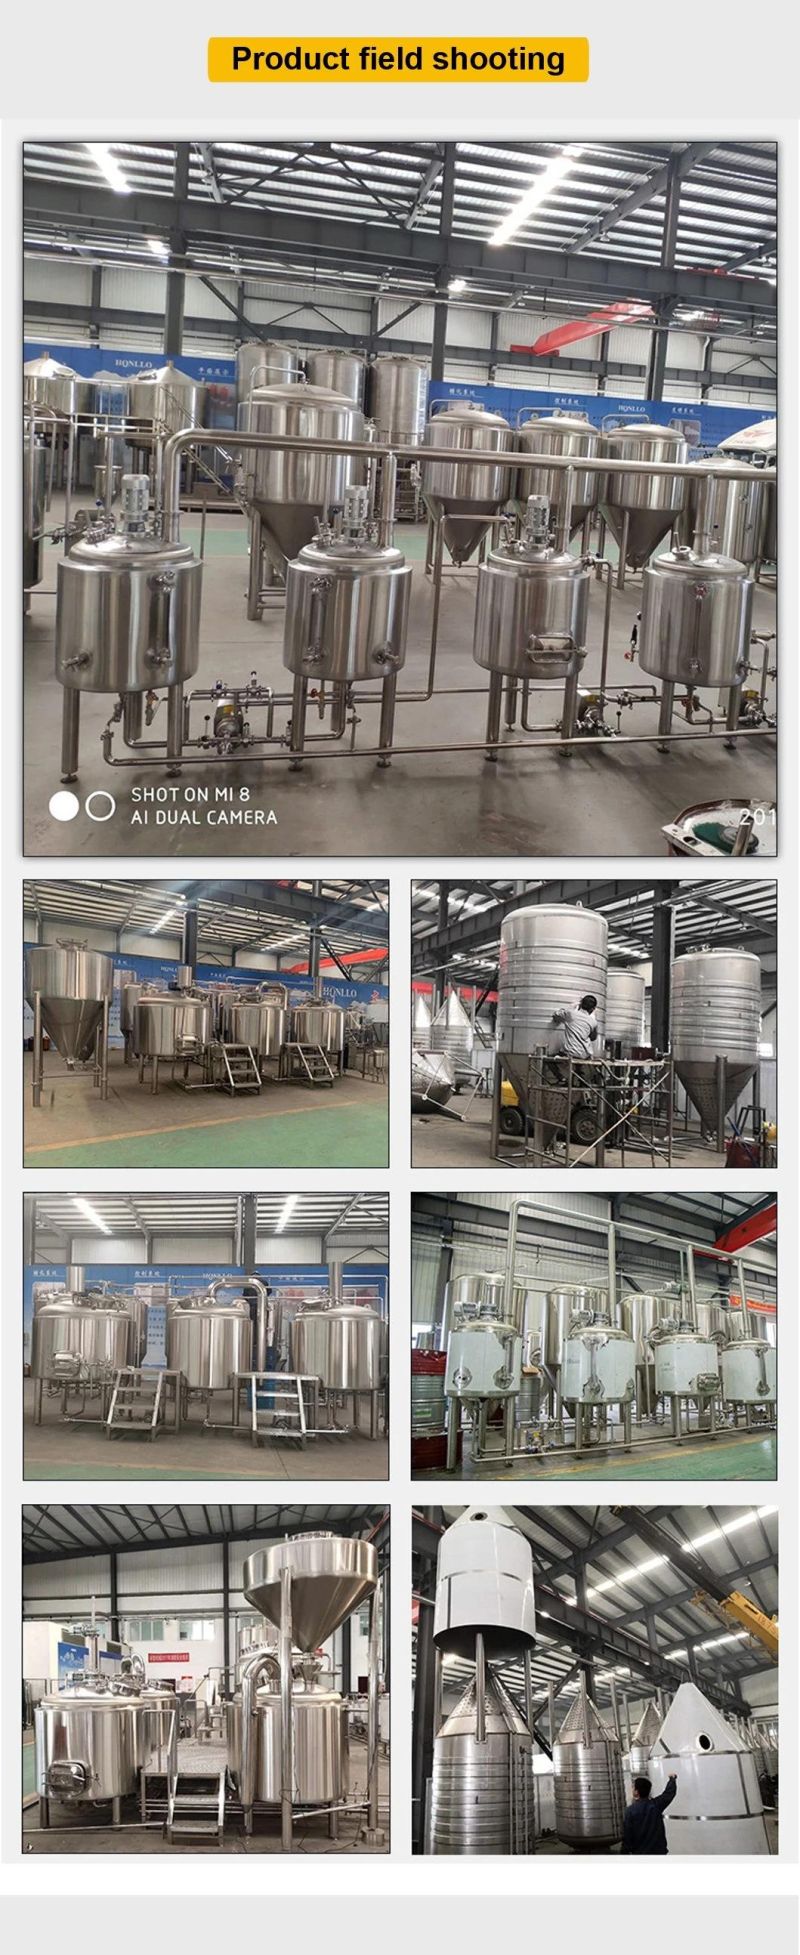 200L 300L 500L 3bbl 5bbl Beer Making Equipment with Customize Service